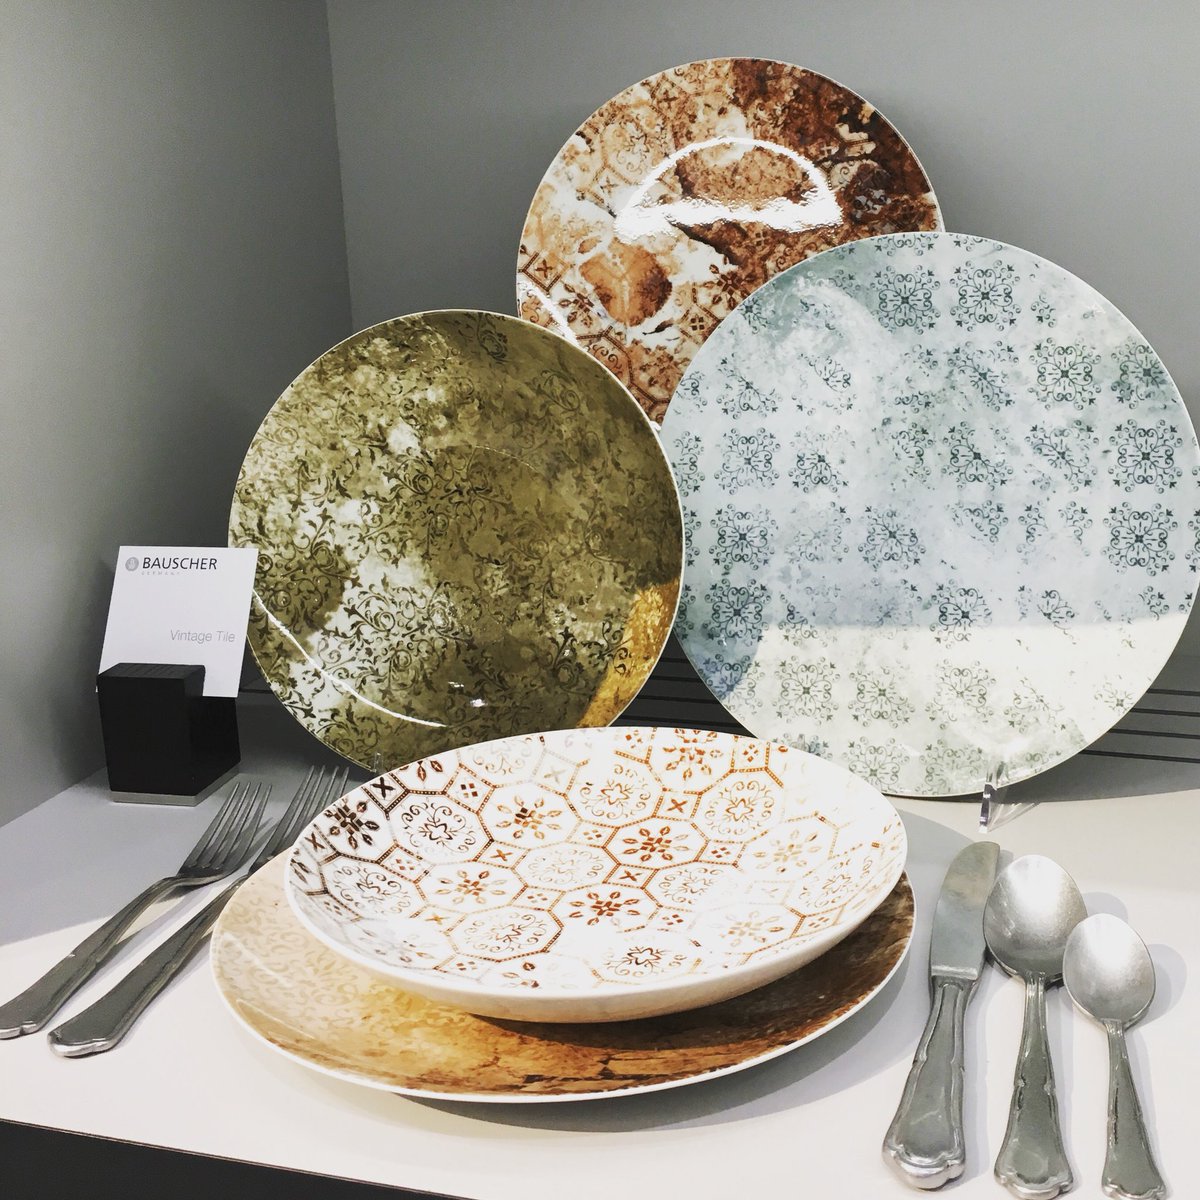 High-quality product meets stunning decor 😍 come see more of what @BauscherHeppUSA has to offer your tabletop experience at Booth # 7237 @NRAShowIntl #TabletopMatters